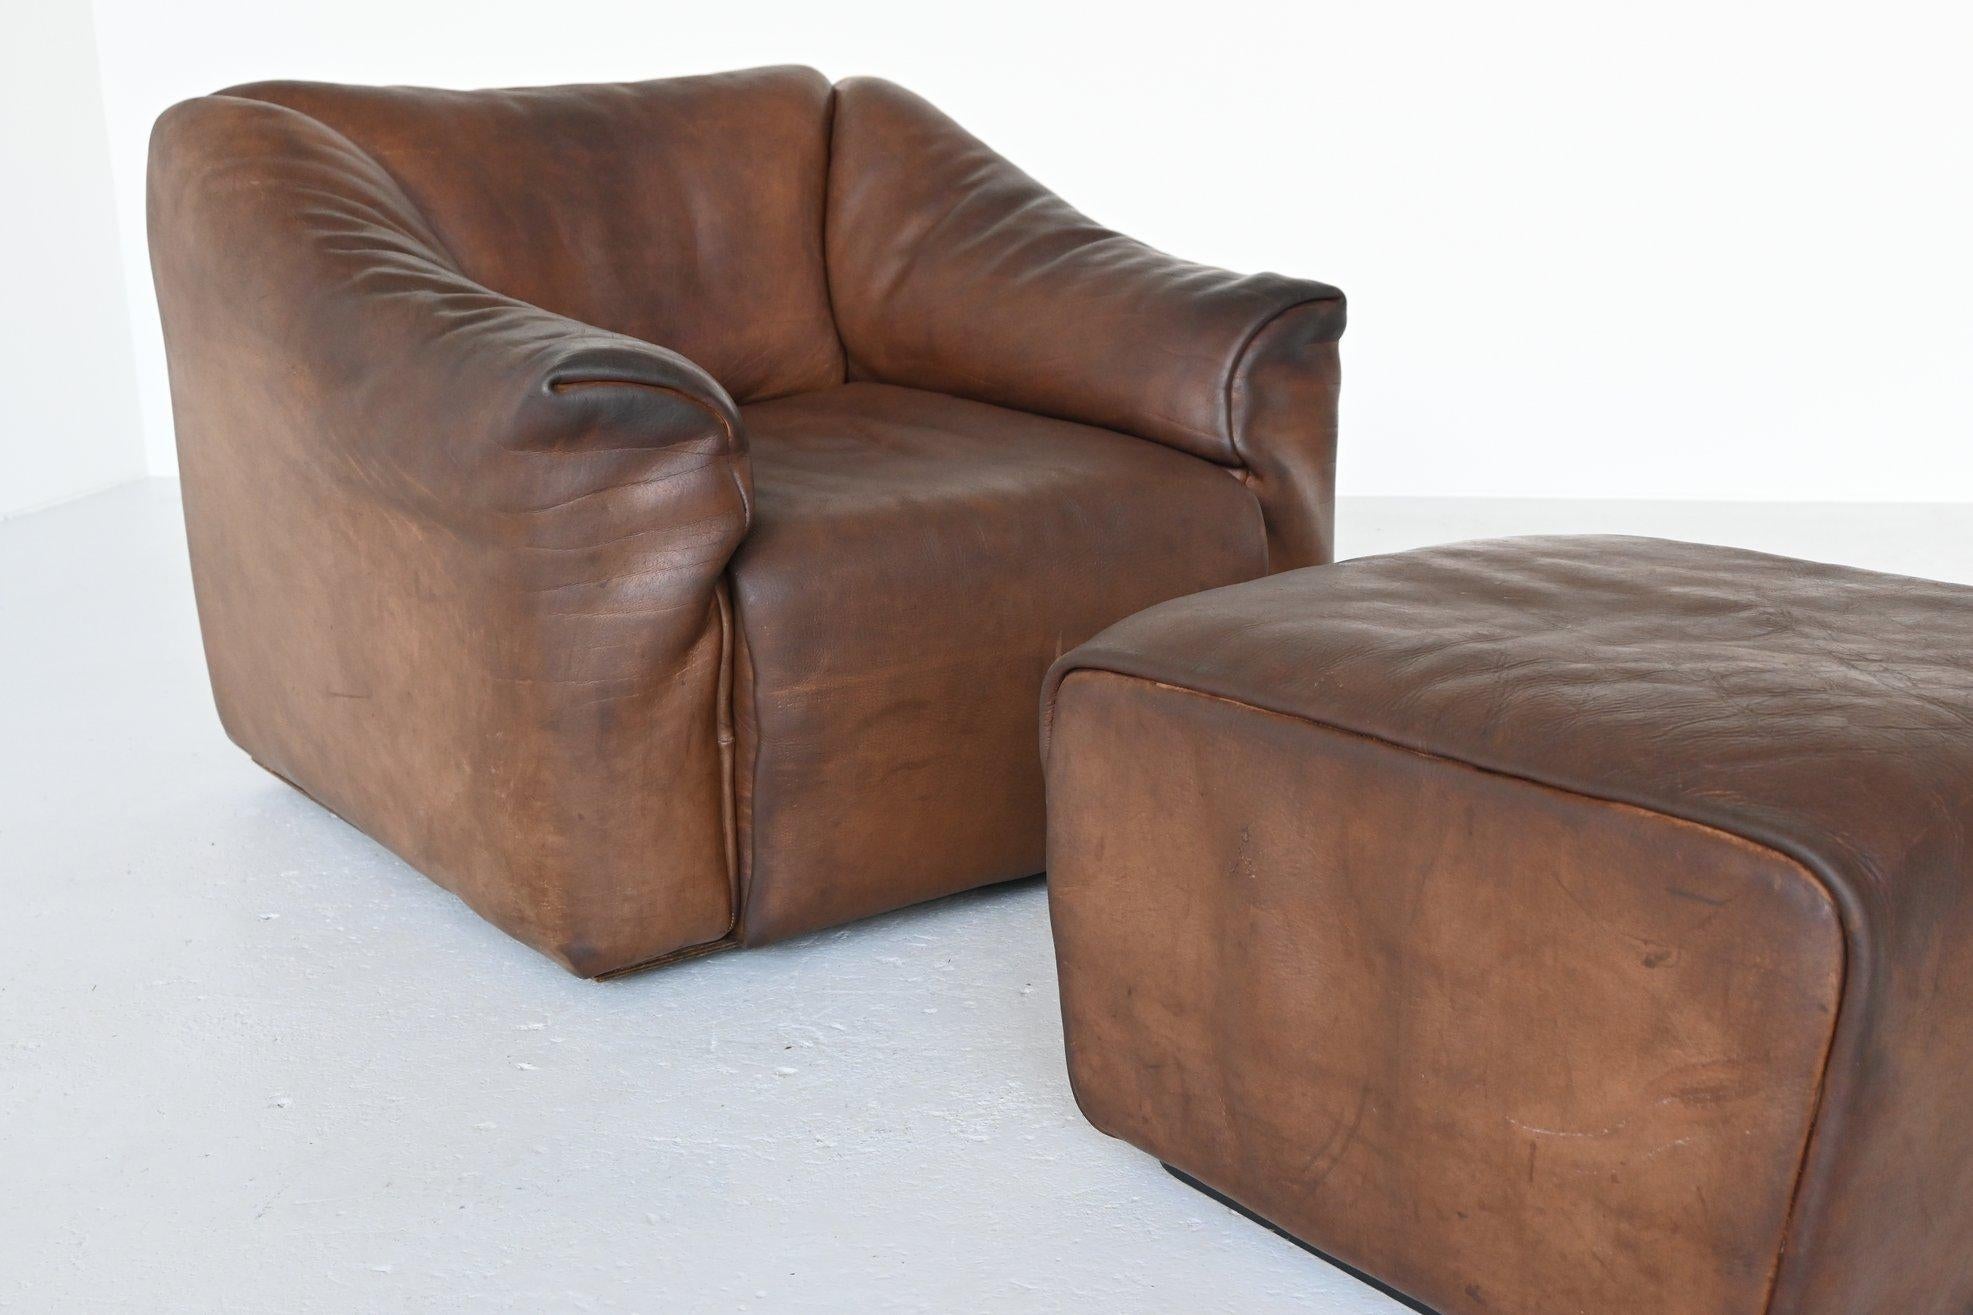 Very comfortable DS47 armchair with ottoman designed and manufactured by De Sede, Switzerland, 1970. This set is made of high quality brown buffalo leather. De Sede is known for its supreme quality leather and comfort seating. The armchair has the